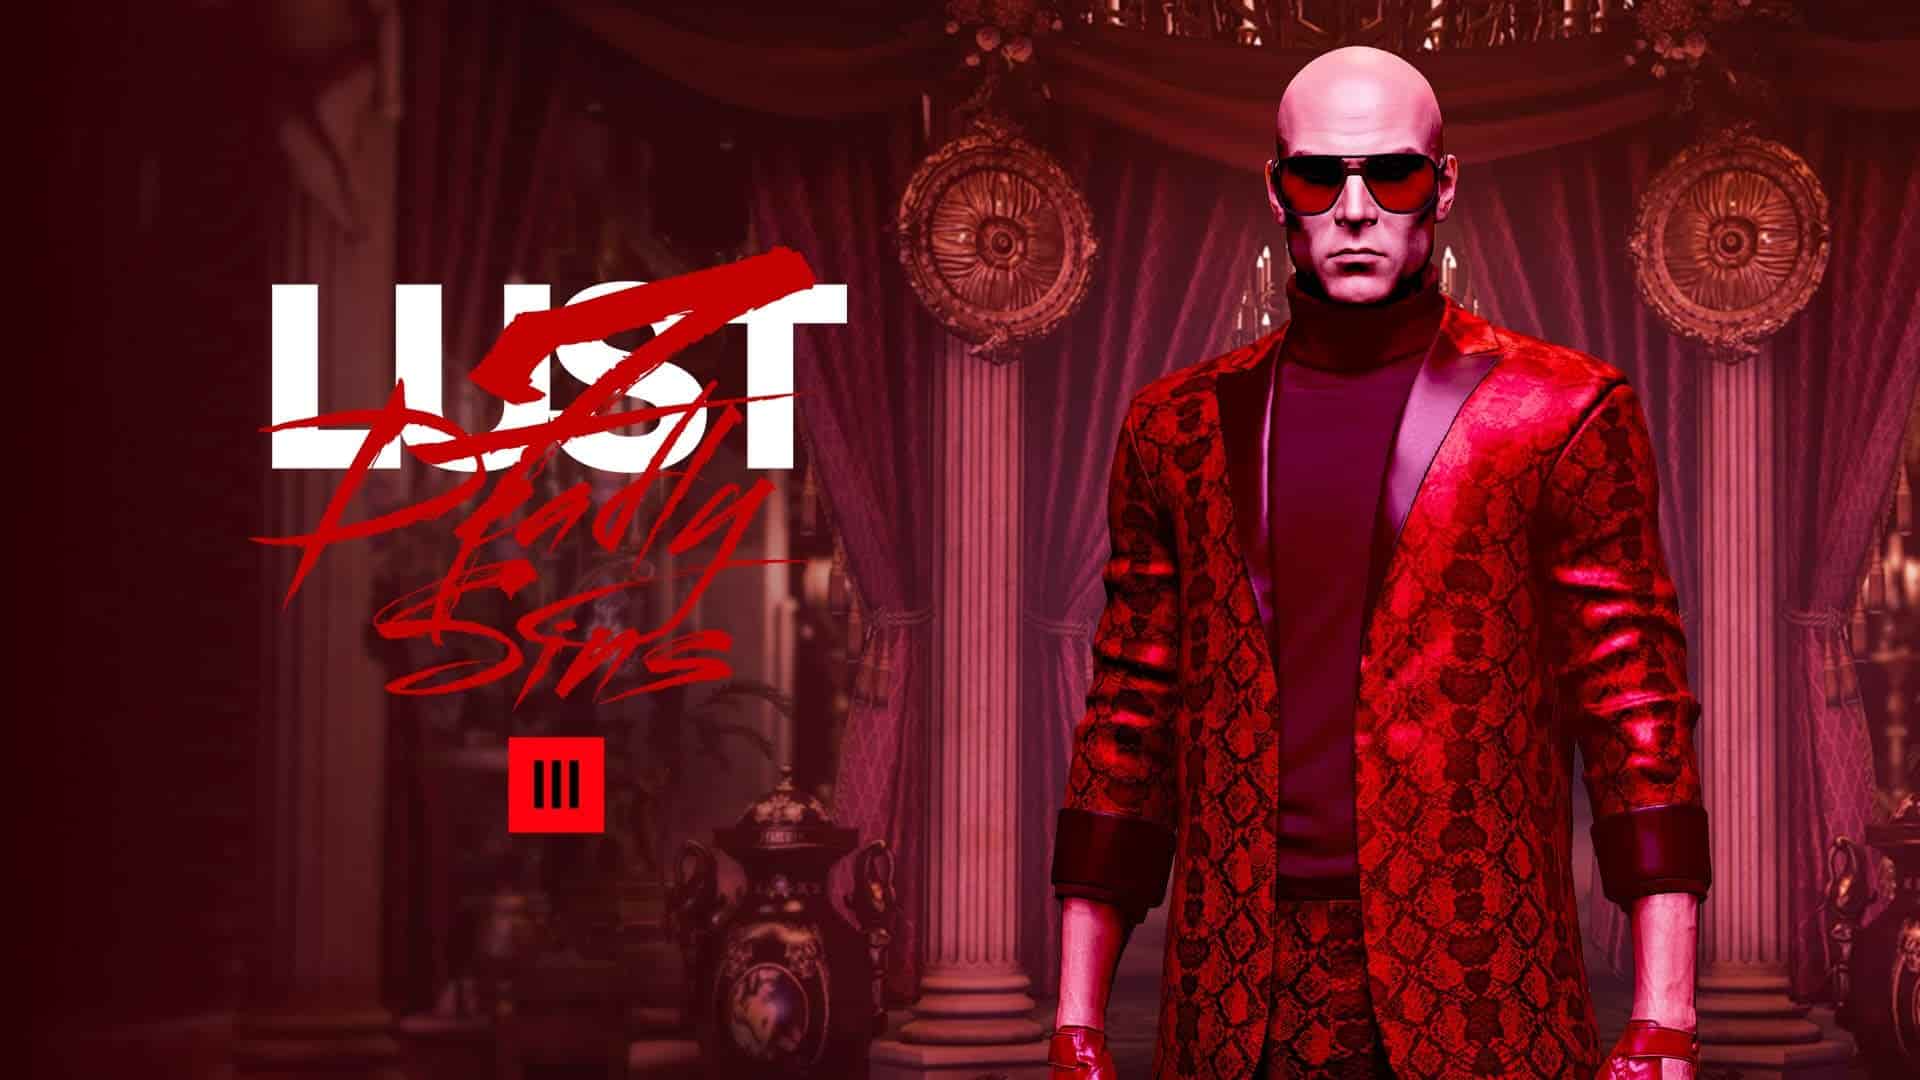 Hitman 3 Update 1.07 Continues The Seven Deadly Sins With Act 4: Lust